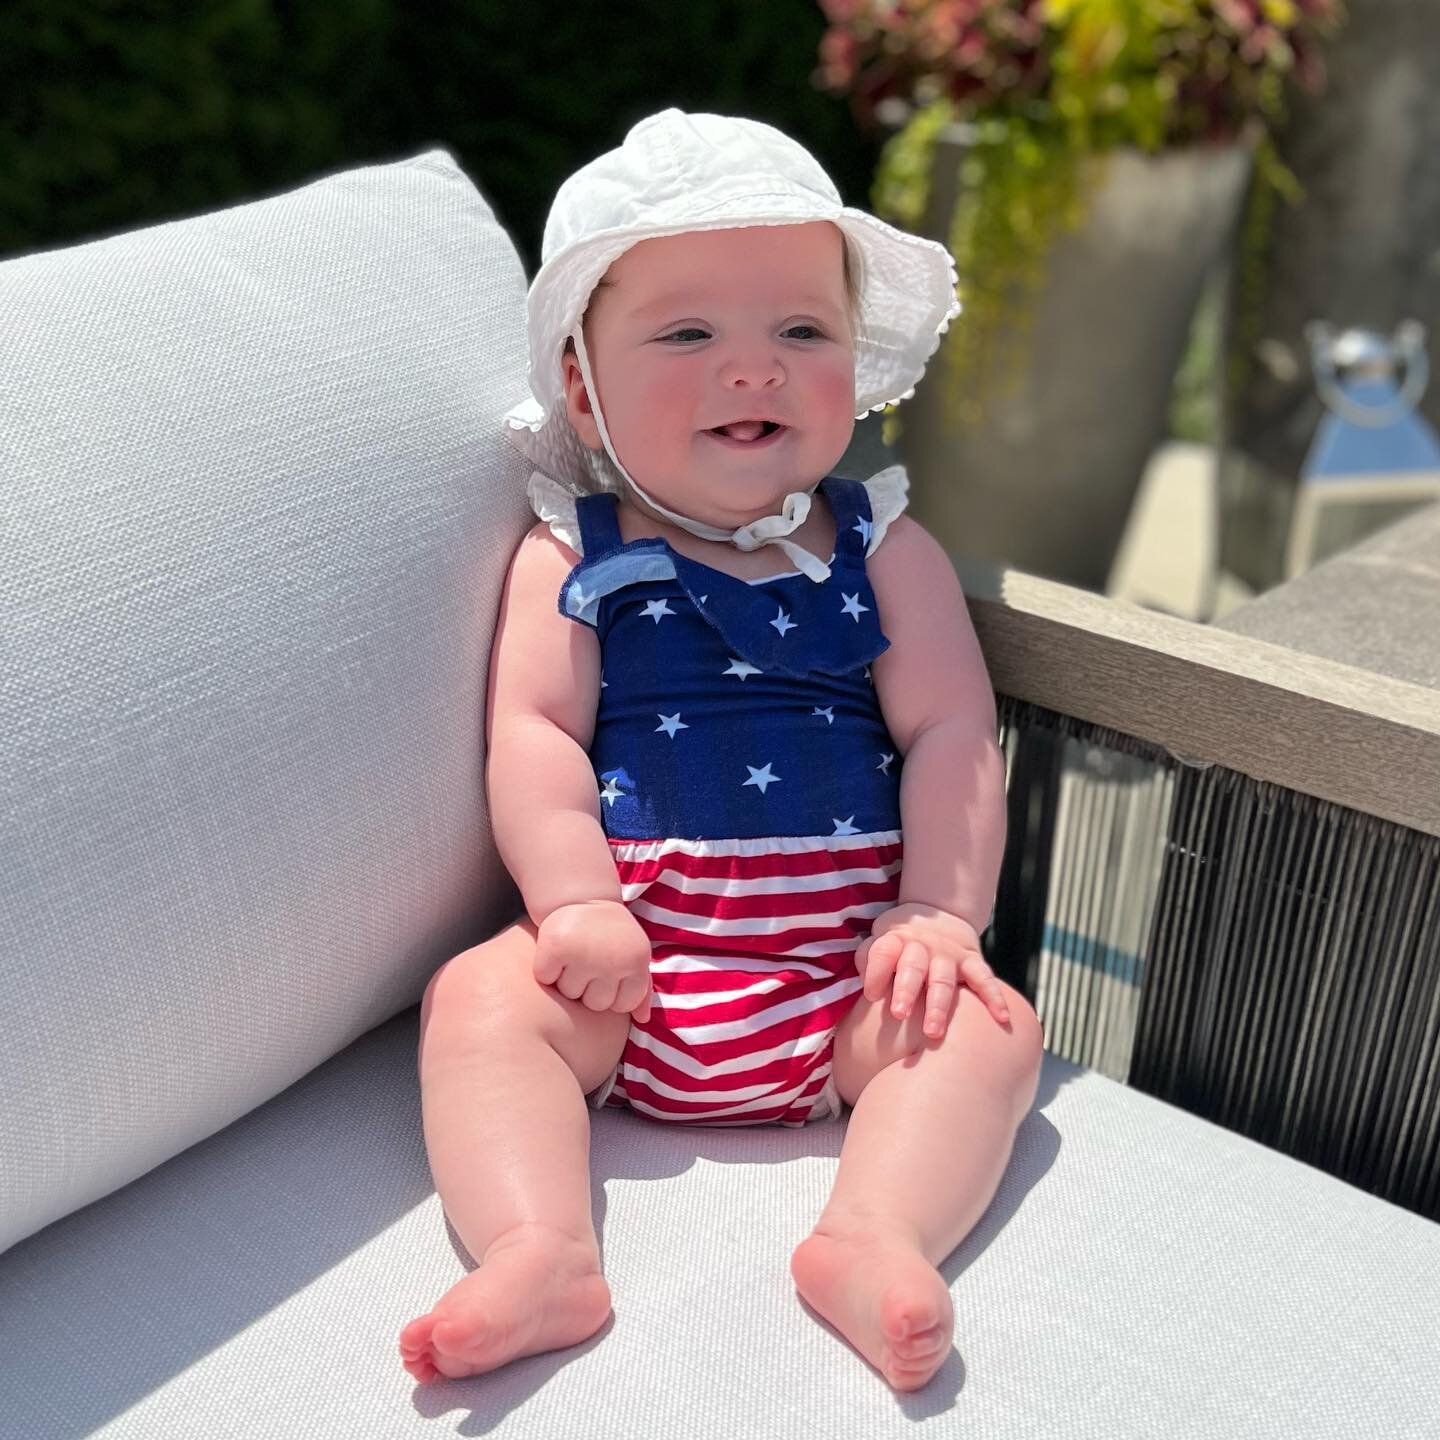 Happy 4th 🇺🇸 from your legacy family, including Dr. Jeff&rsquo;s baby Sienna!  Enjoy the holiday and stay safe 🎇 #legacyortho #bestofloudoun2022 
&bull;
&bull;
&bull;
#yoursmileyourlegacy #fourthofjuly #invisalign #americanbaby